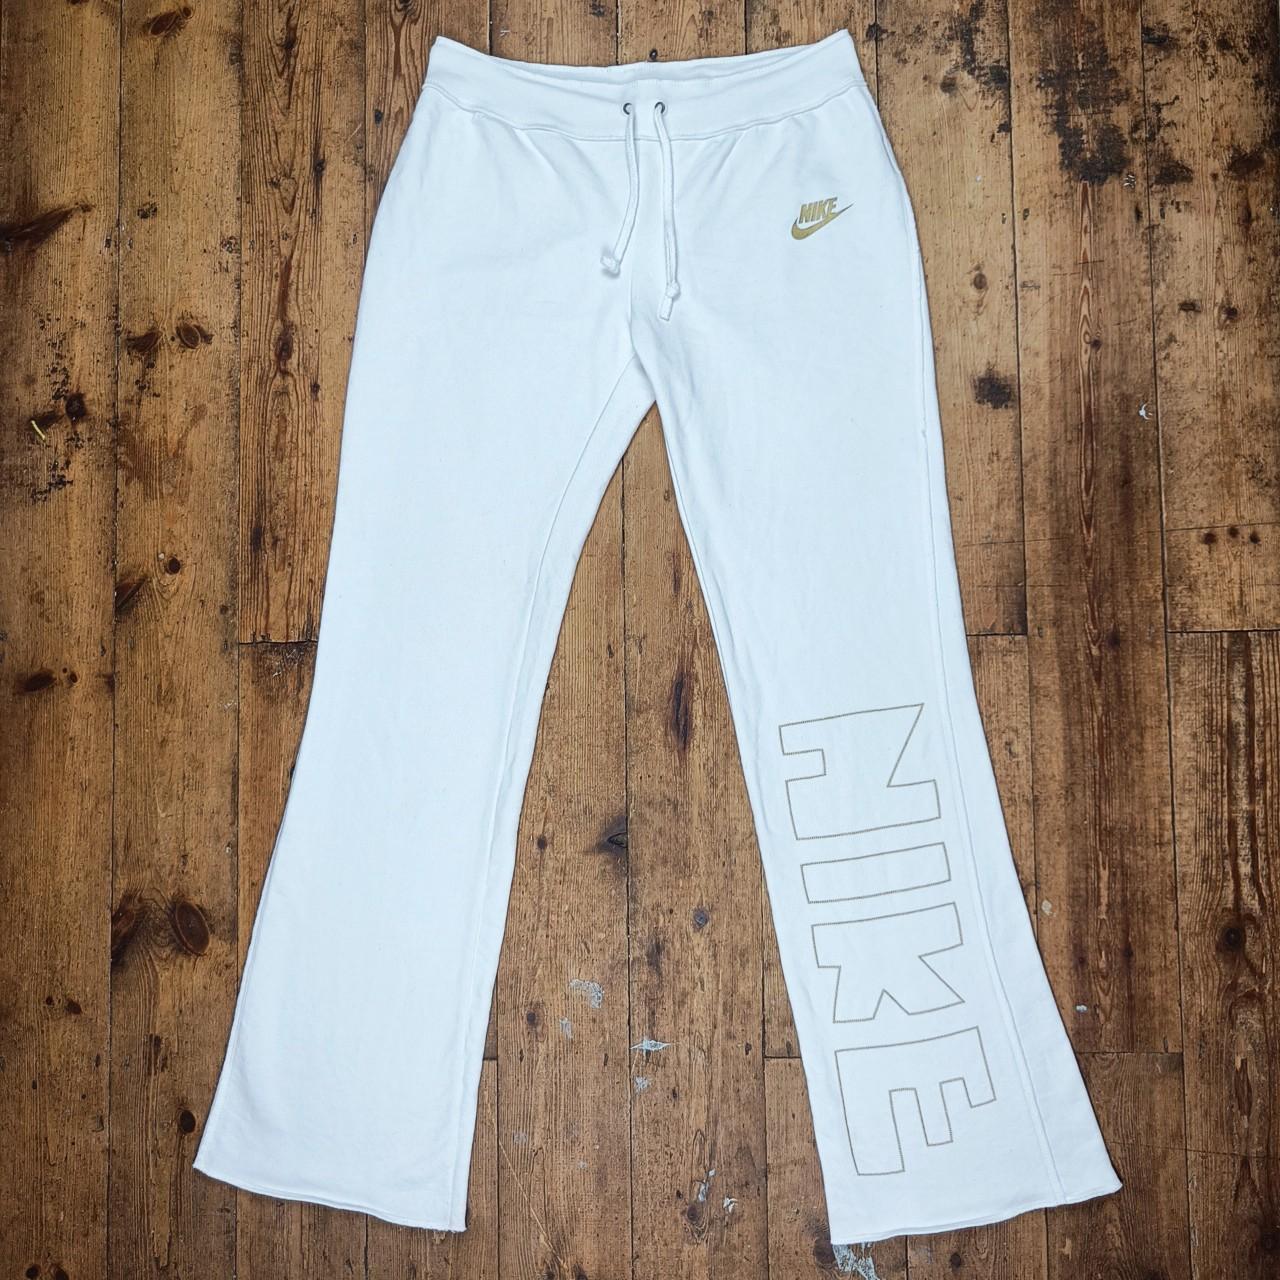 brand new with tags Nike flare sweatpants white - Depop